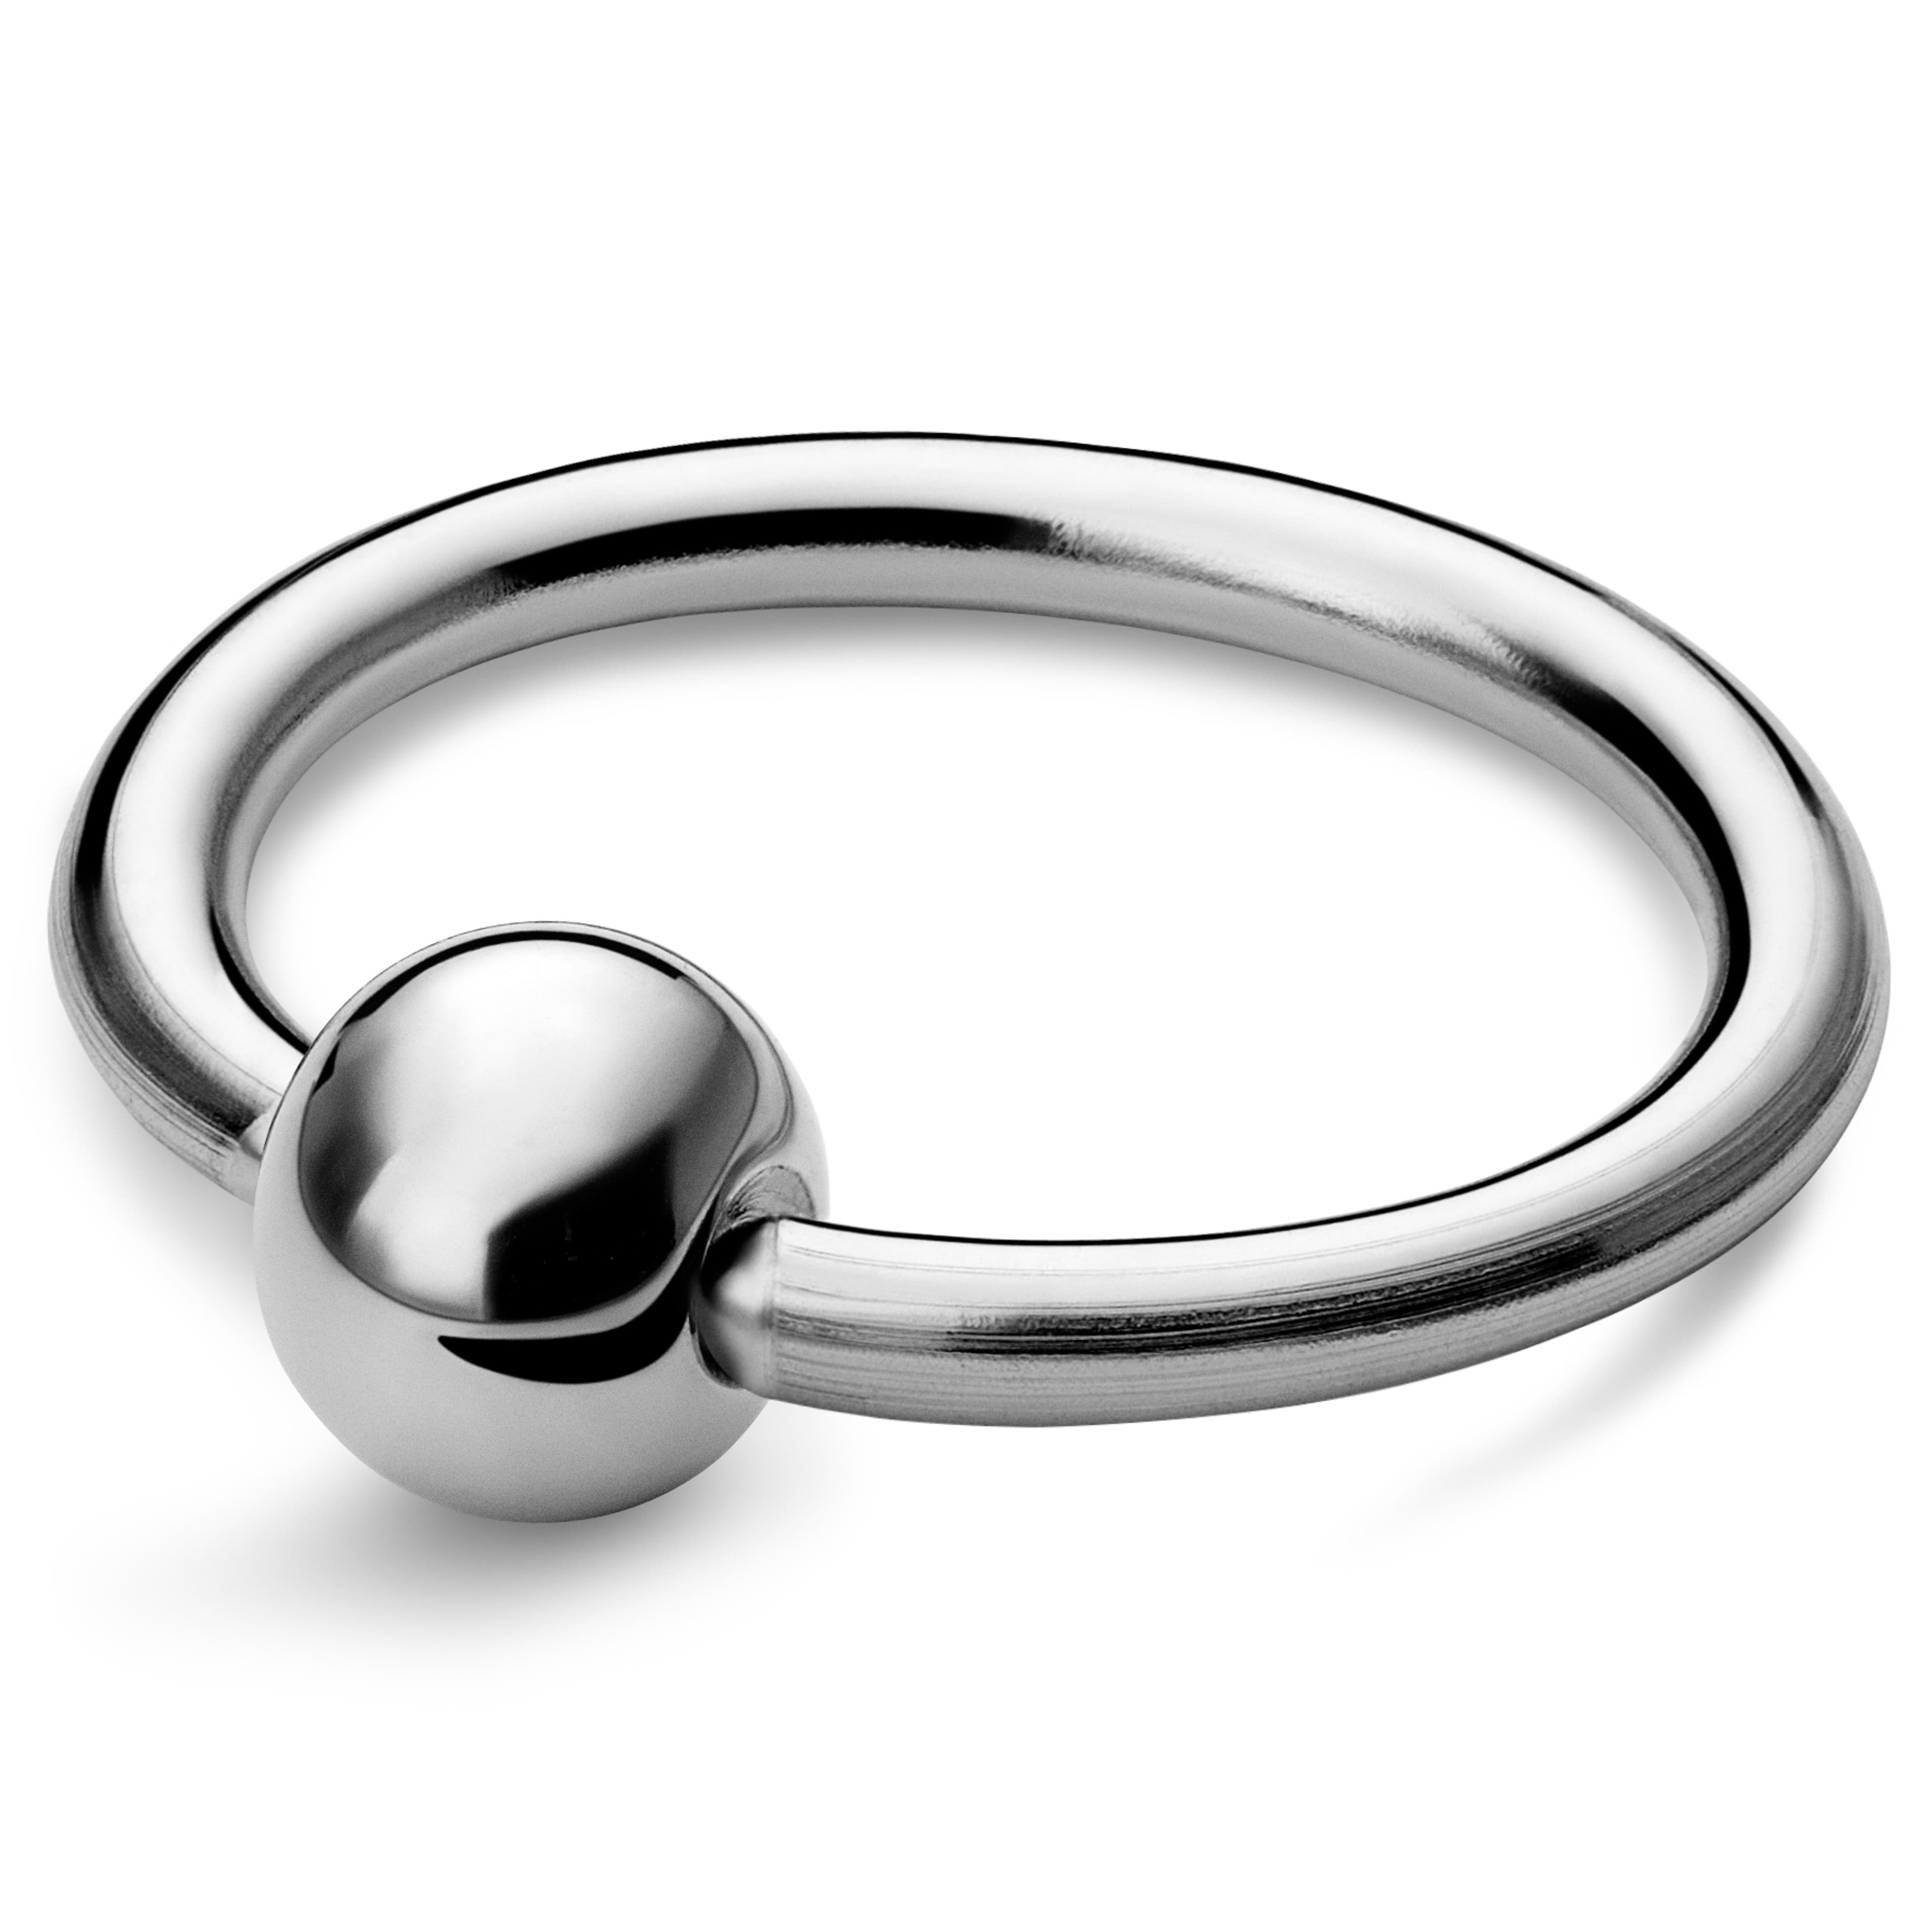 6 mm Silver-Tone Surgical Steel Captive Bead Ring